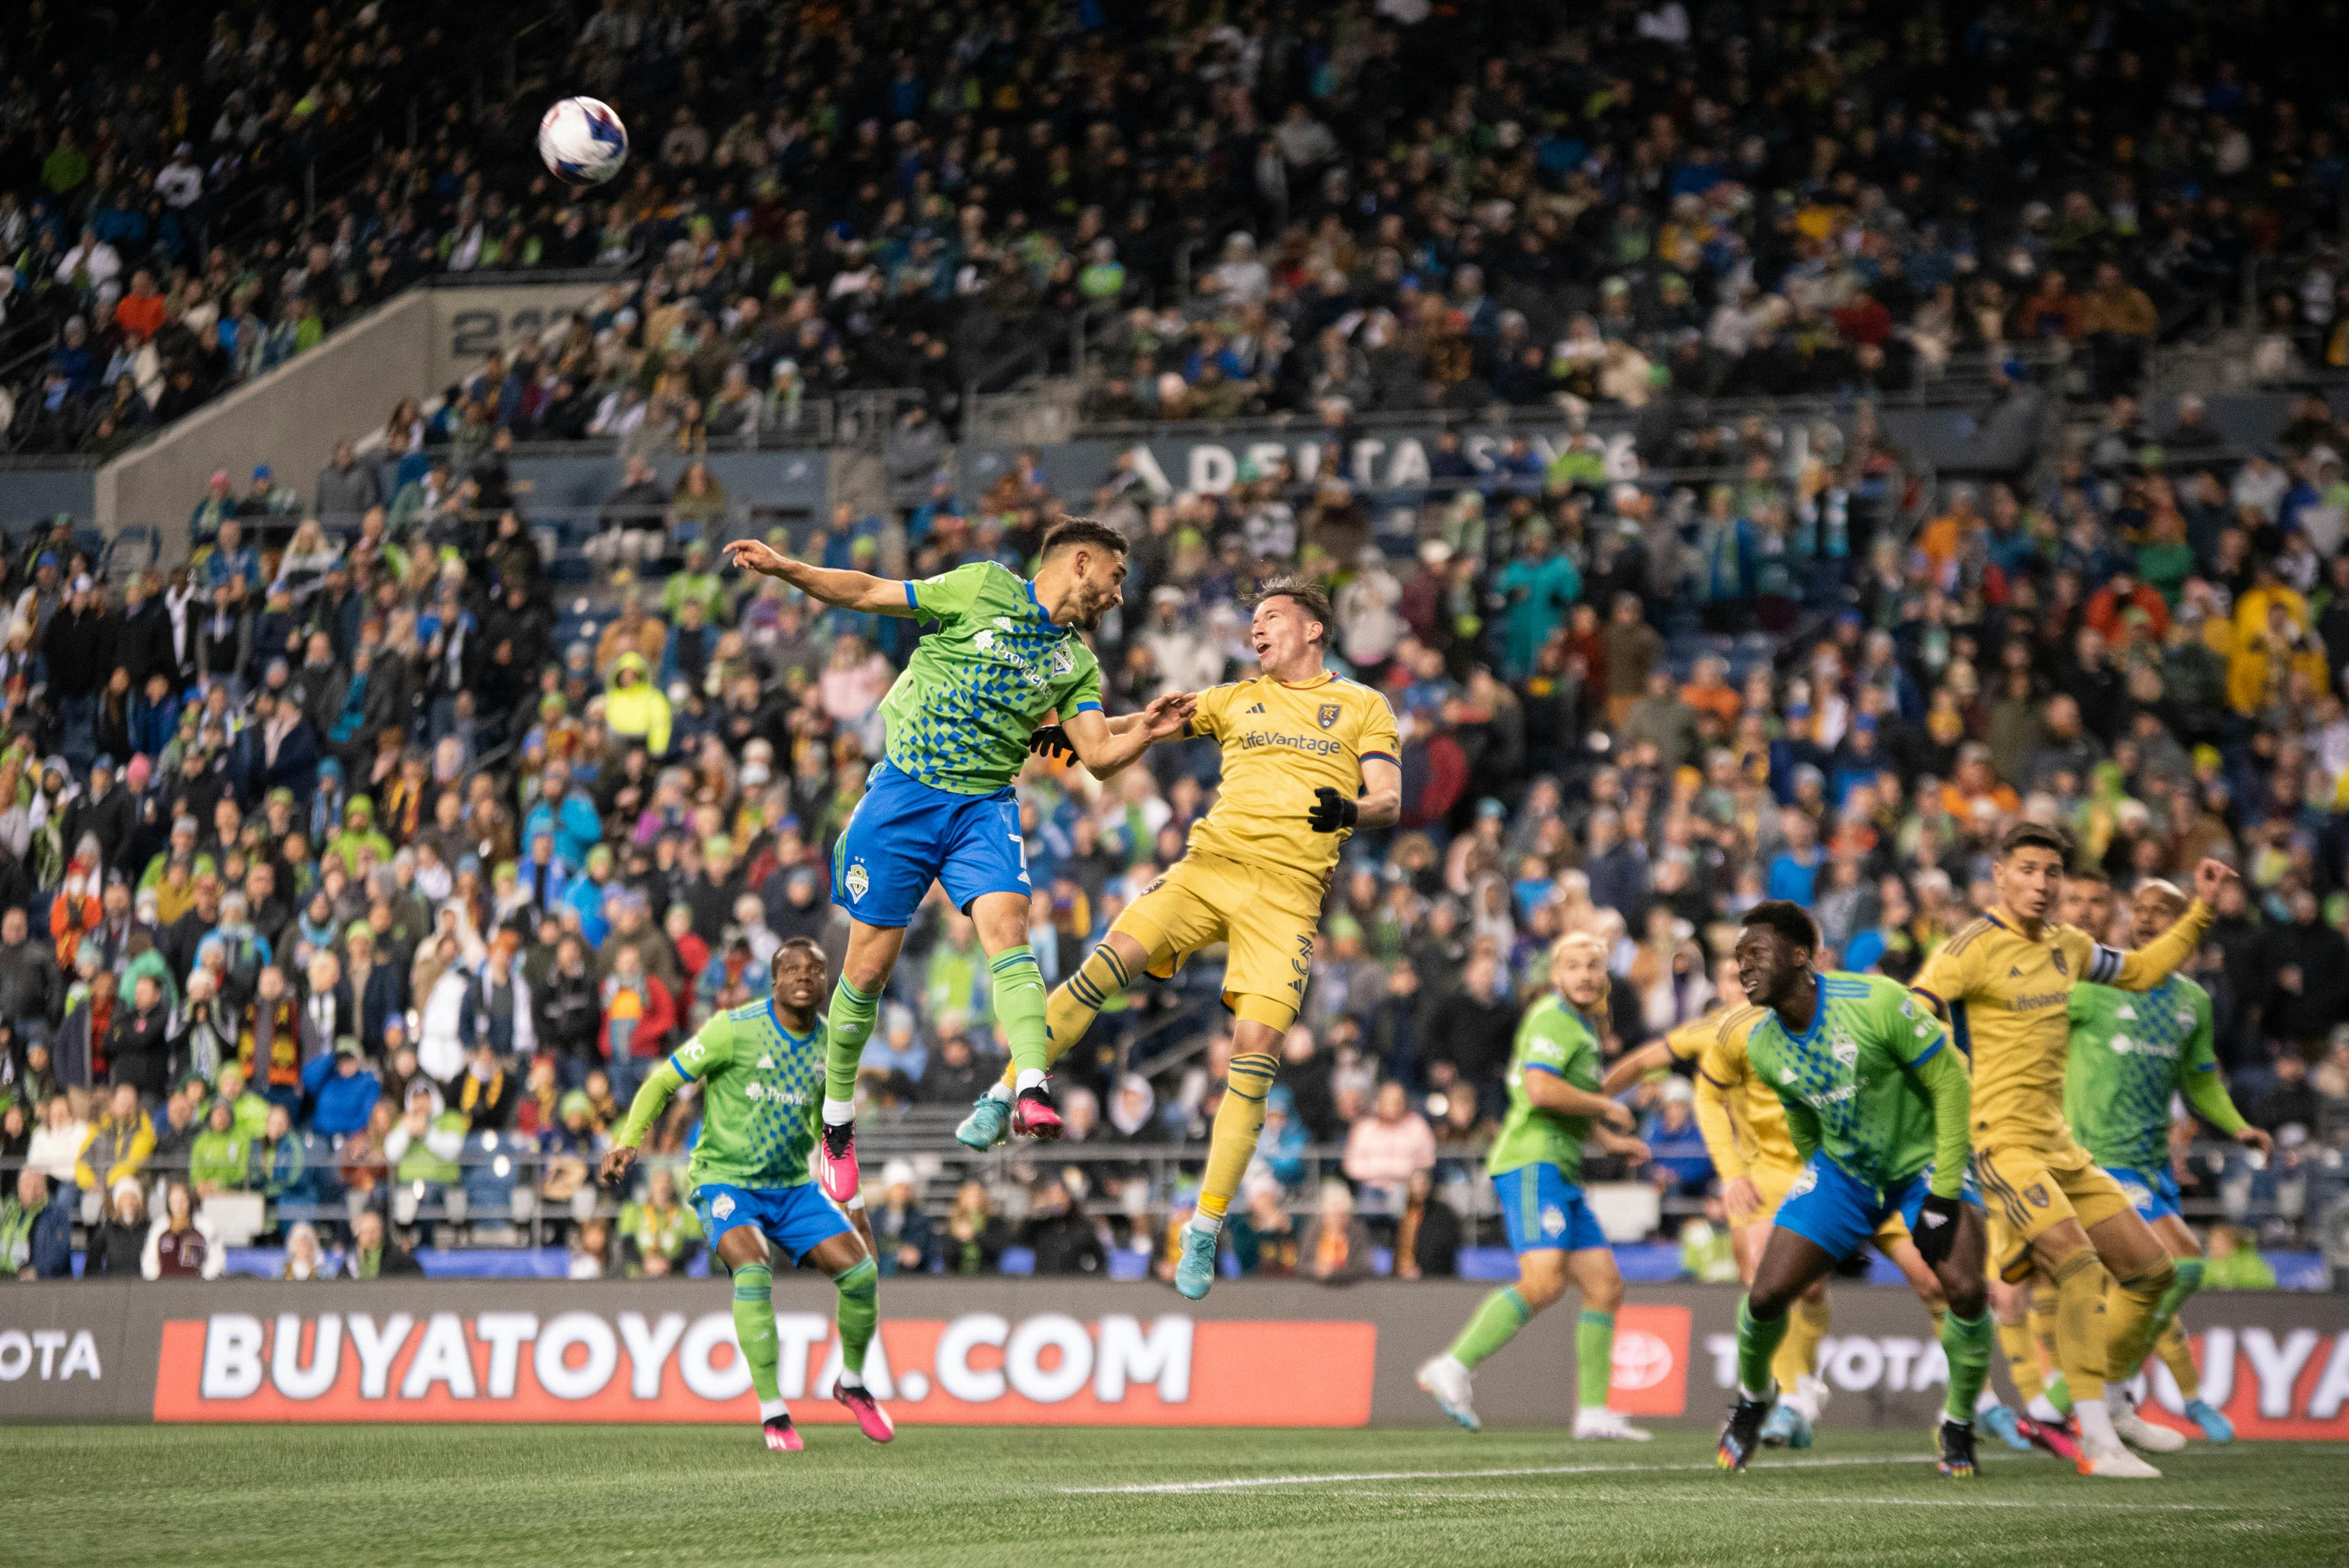 Bryan Oviedo and Cristian Roldan battle for a ball in the air